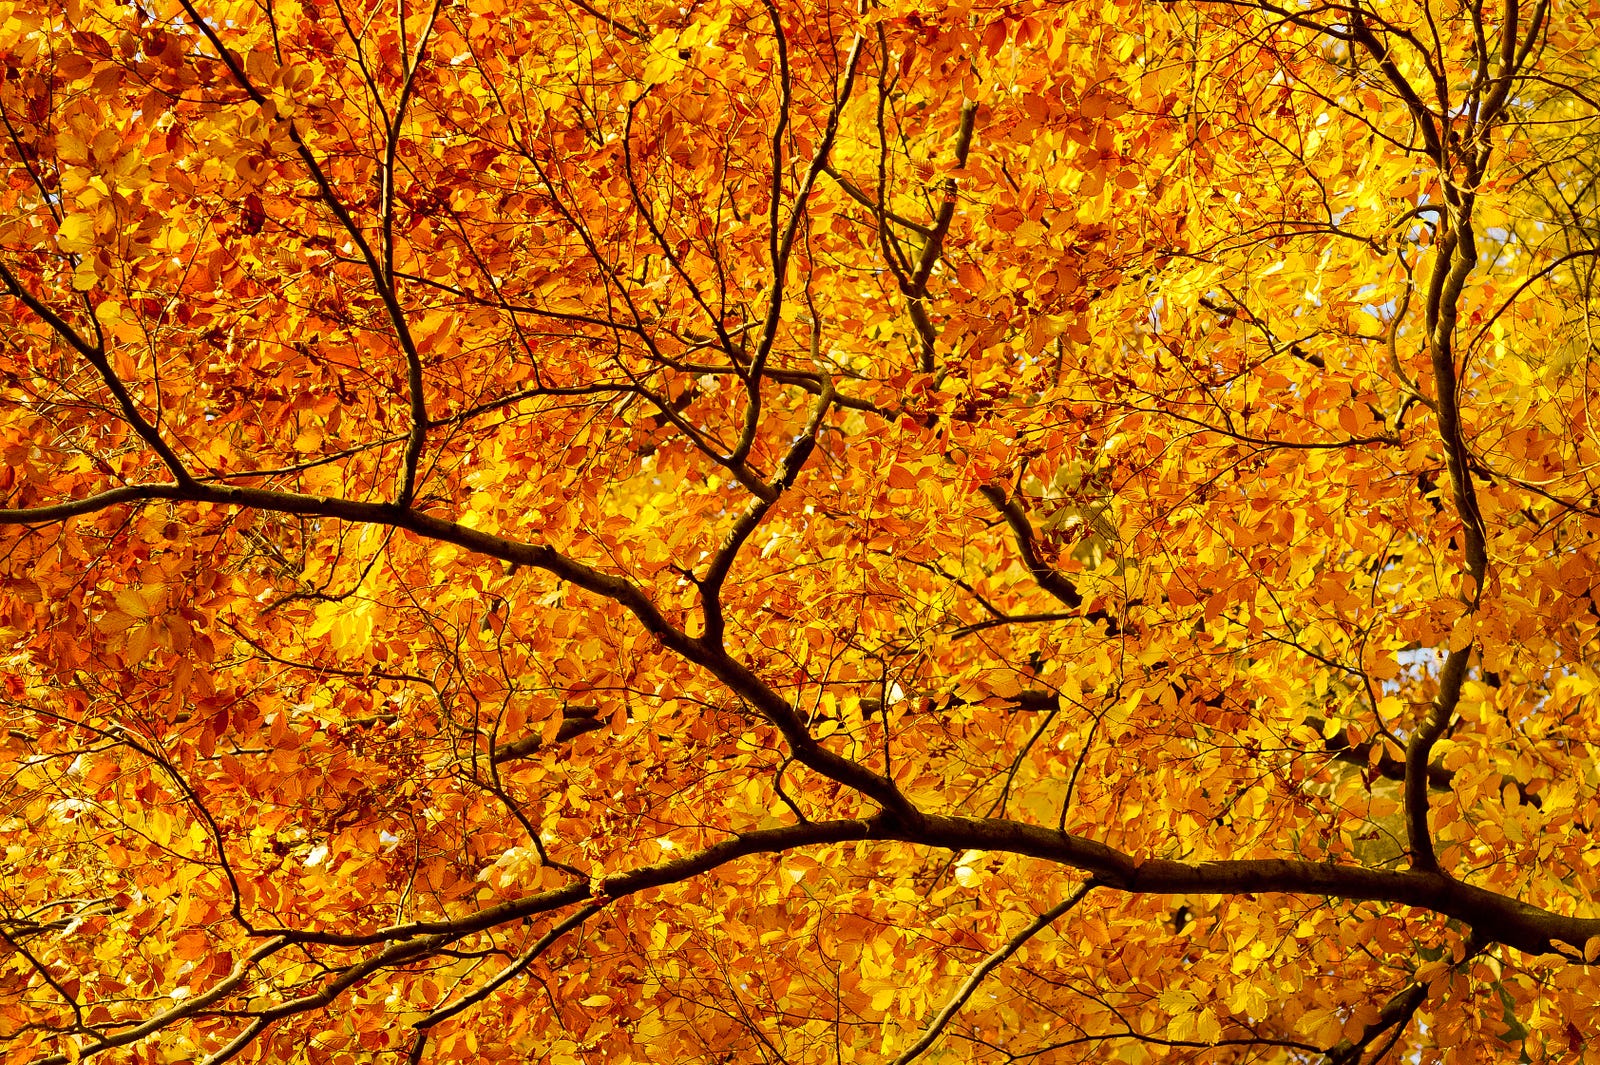 A photo of a tress from below, leaves ablaze  in autumn golden yellow. Running in nature exposes an individual to trees or water that have fractal complexities linked to lower anxiety.